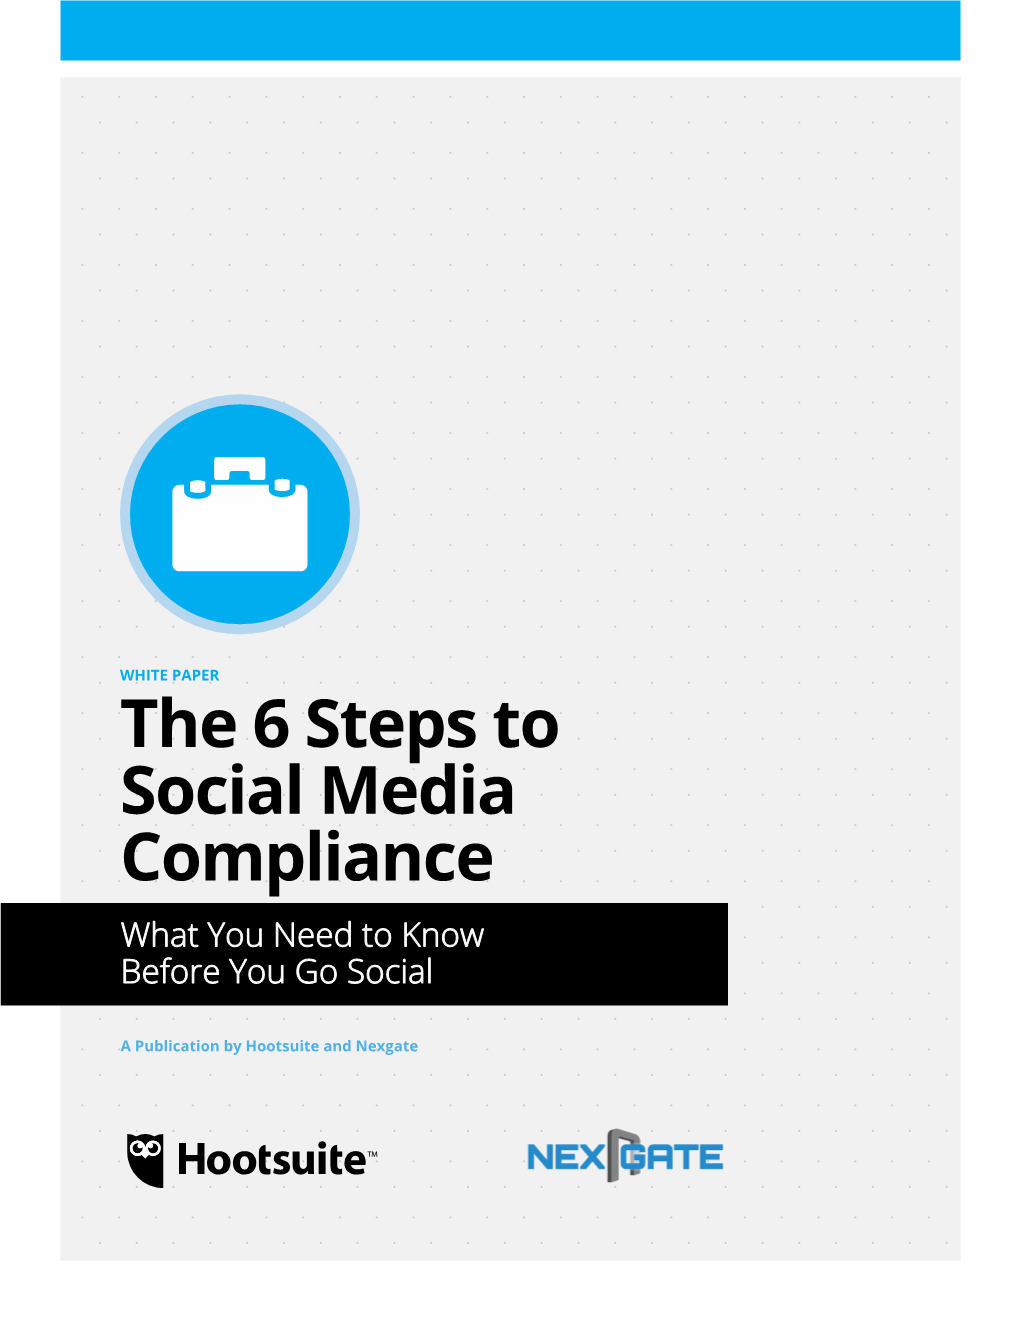 The 6 Steps to Social Media Compliance What You Need to Know Before You Go Social